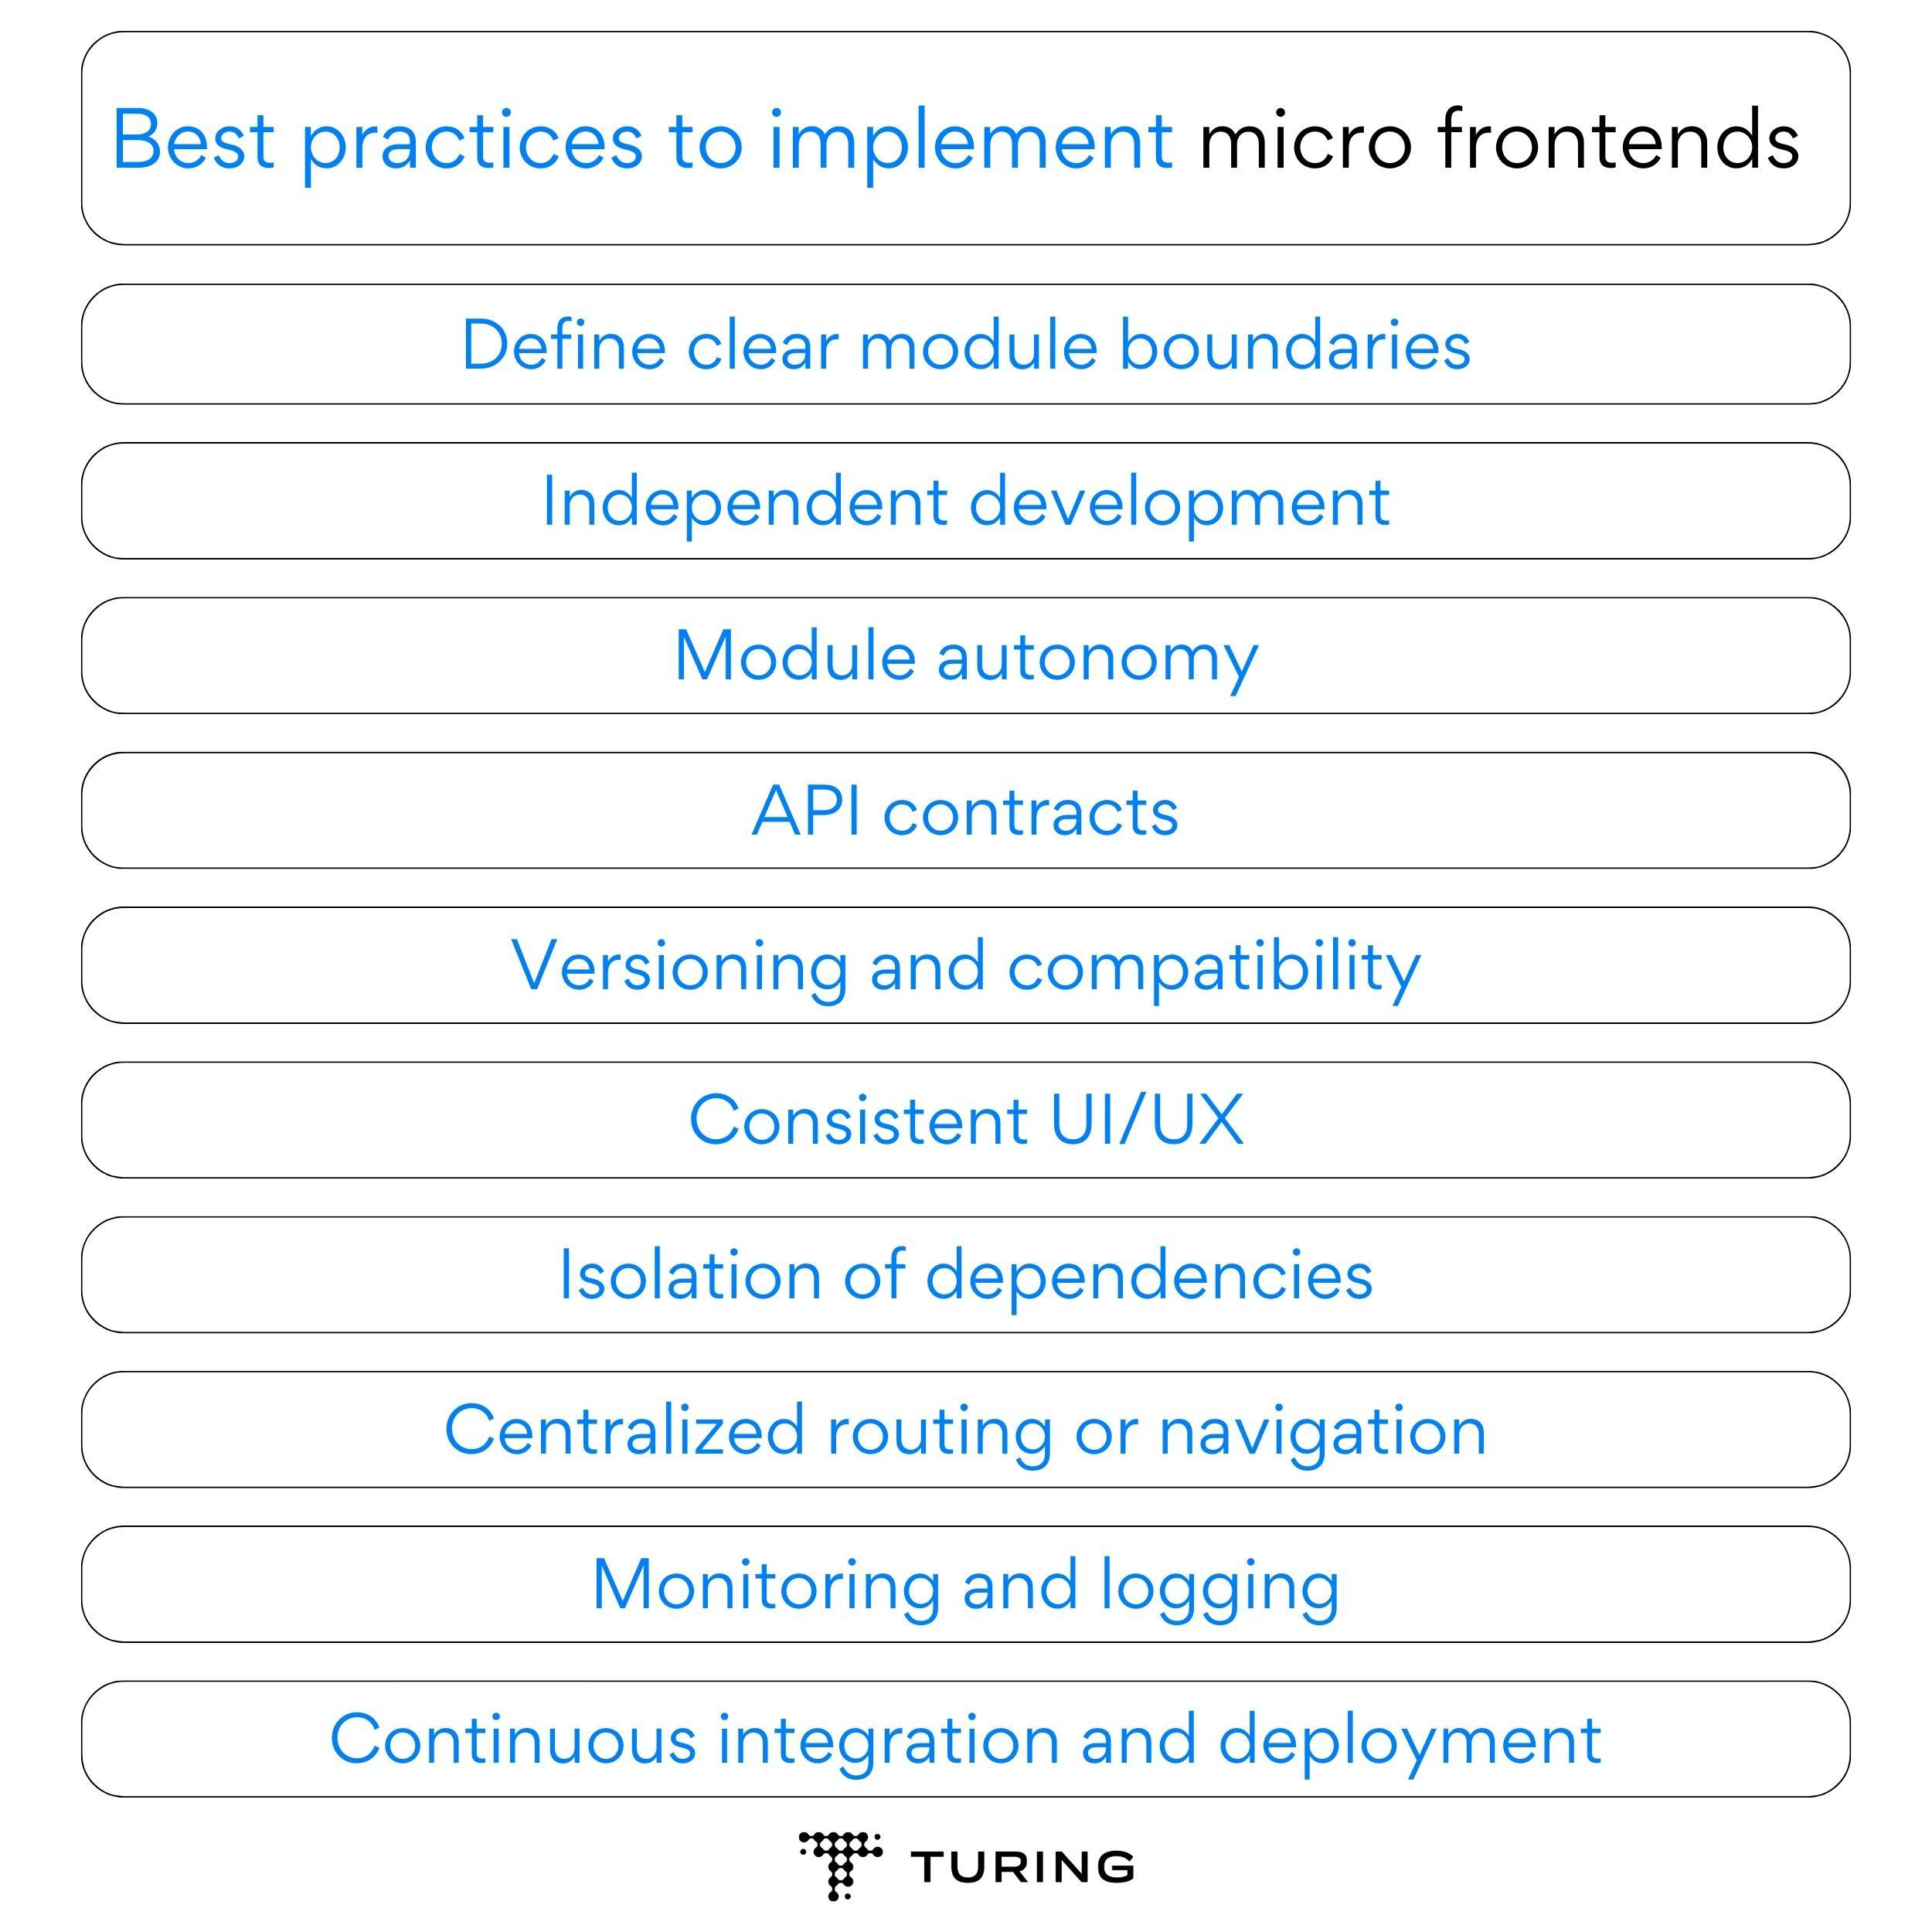 Best practices to implement micro frontends